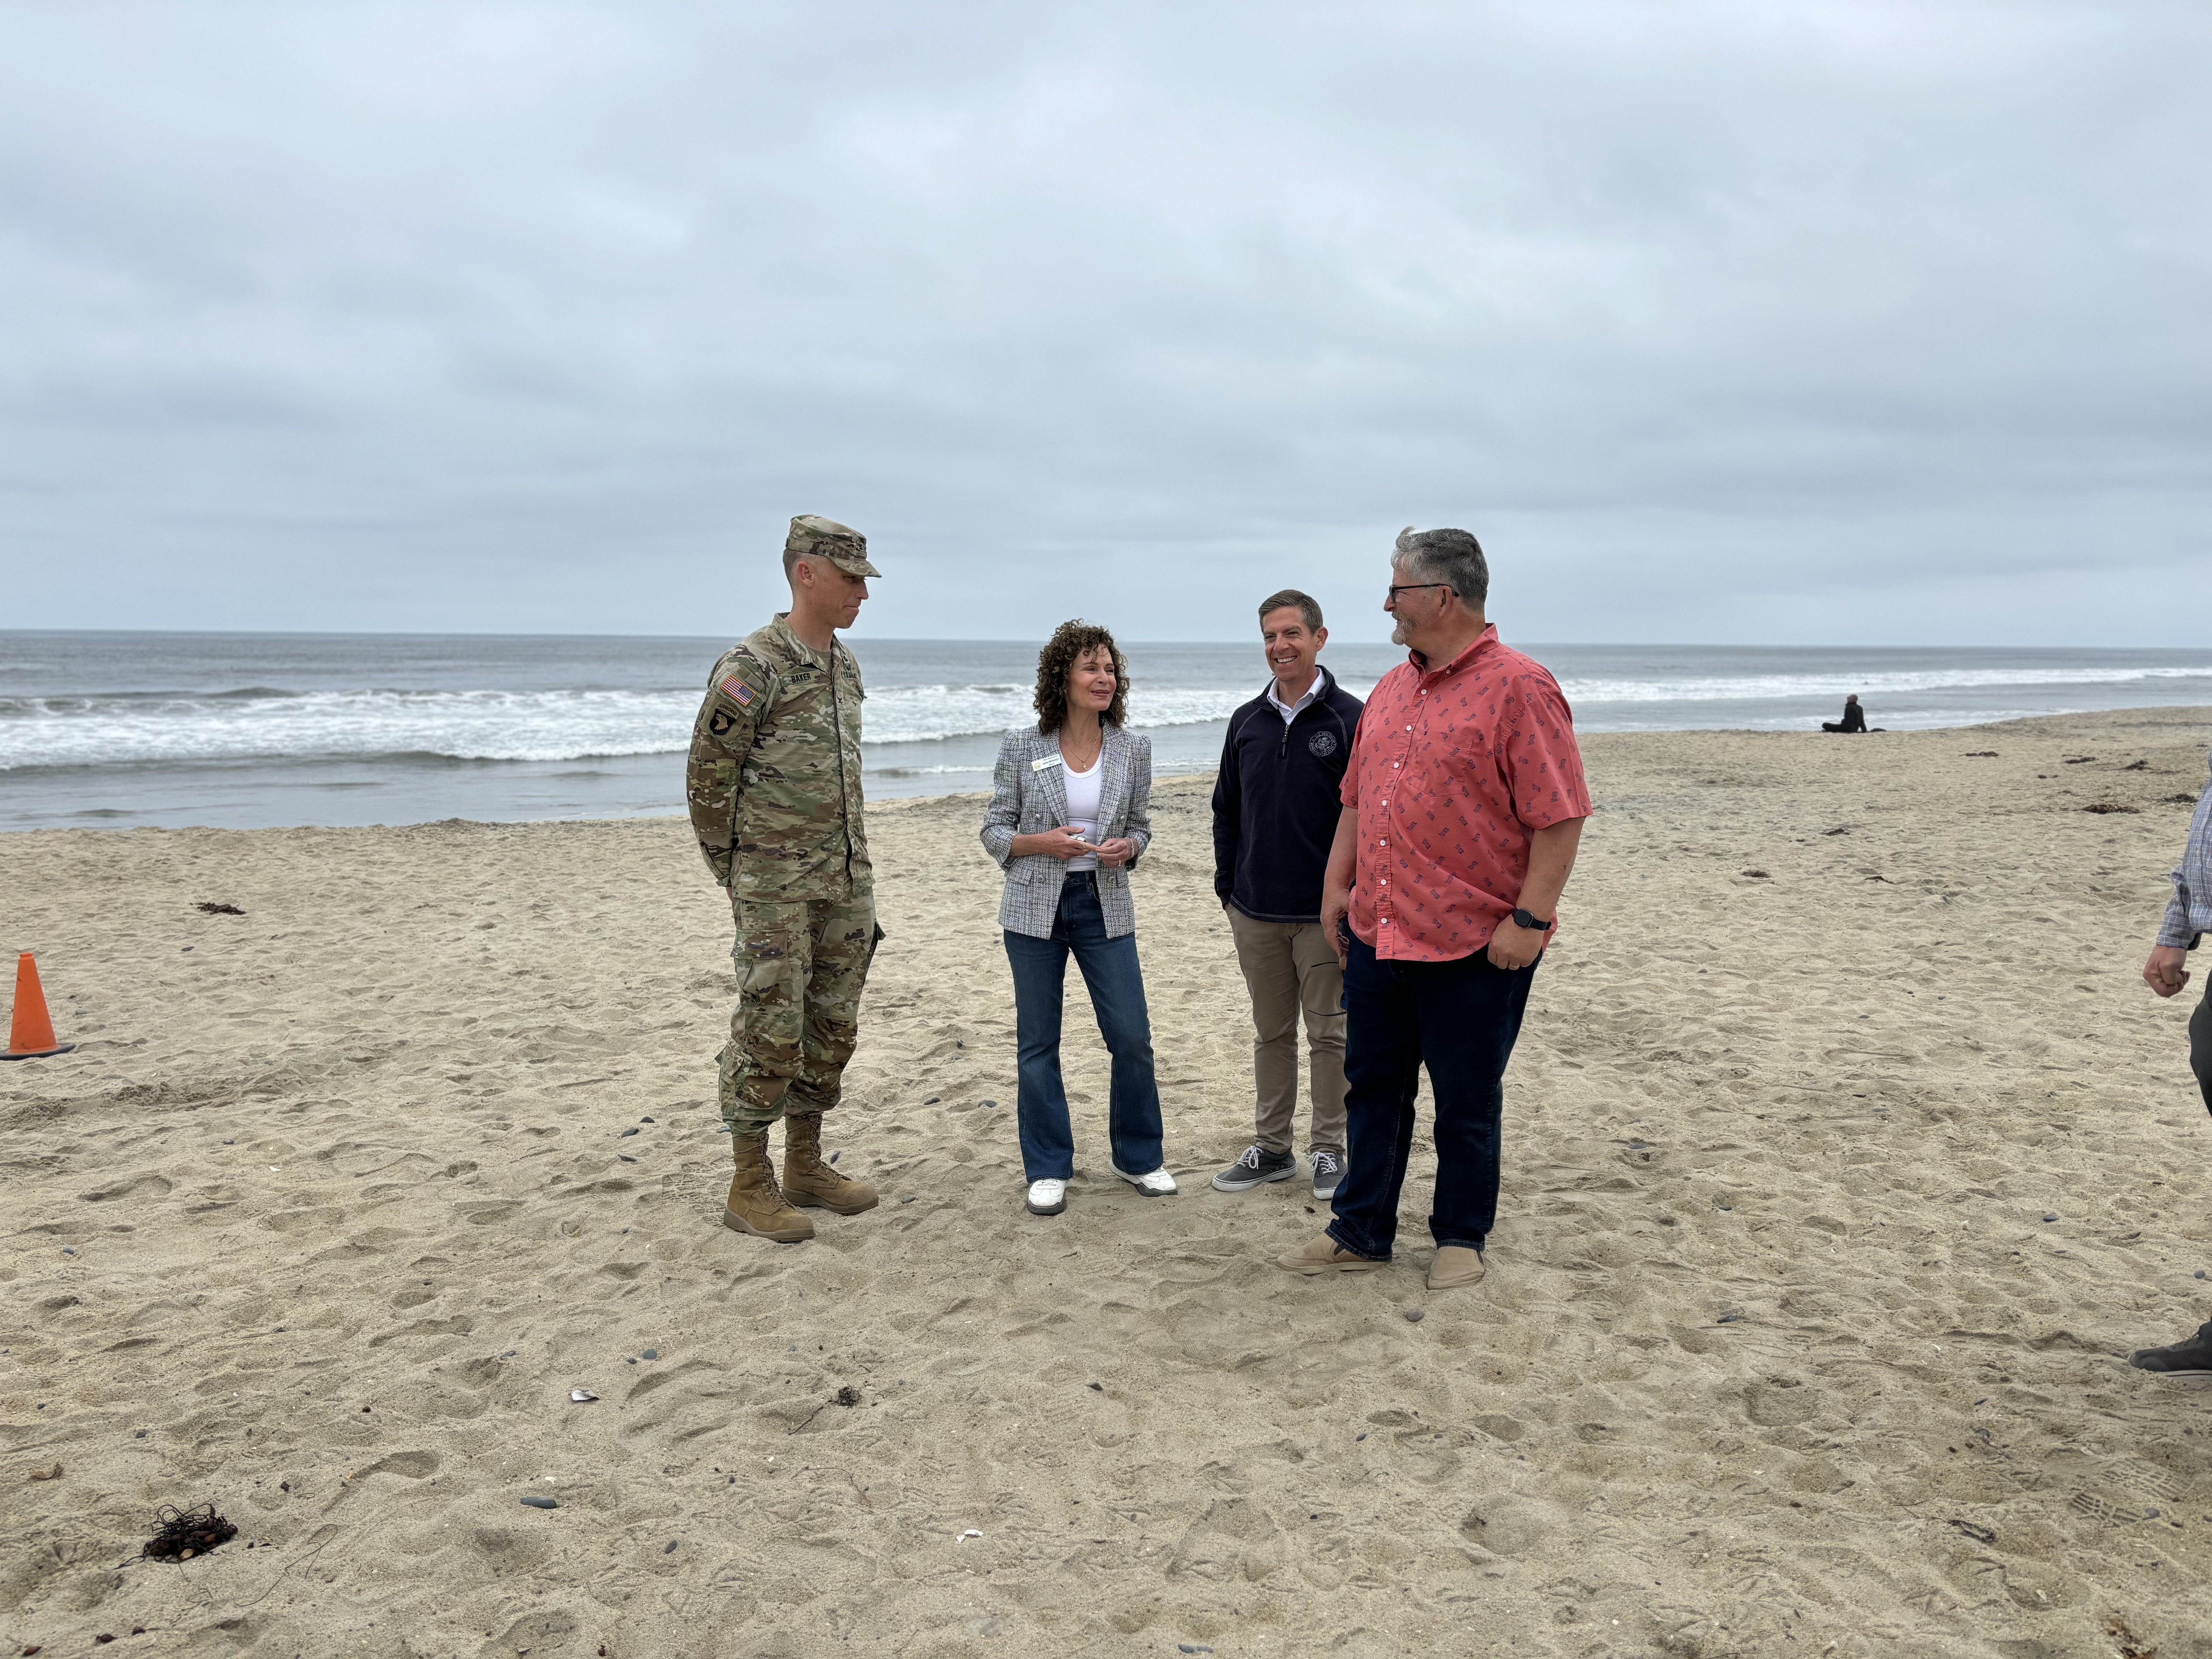 Rep. Mike Levin Unveils Completion of Encinitas-Solana Beach Sand Replenishment & Storm Damage Reduction Project